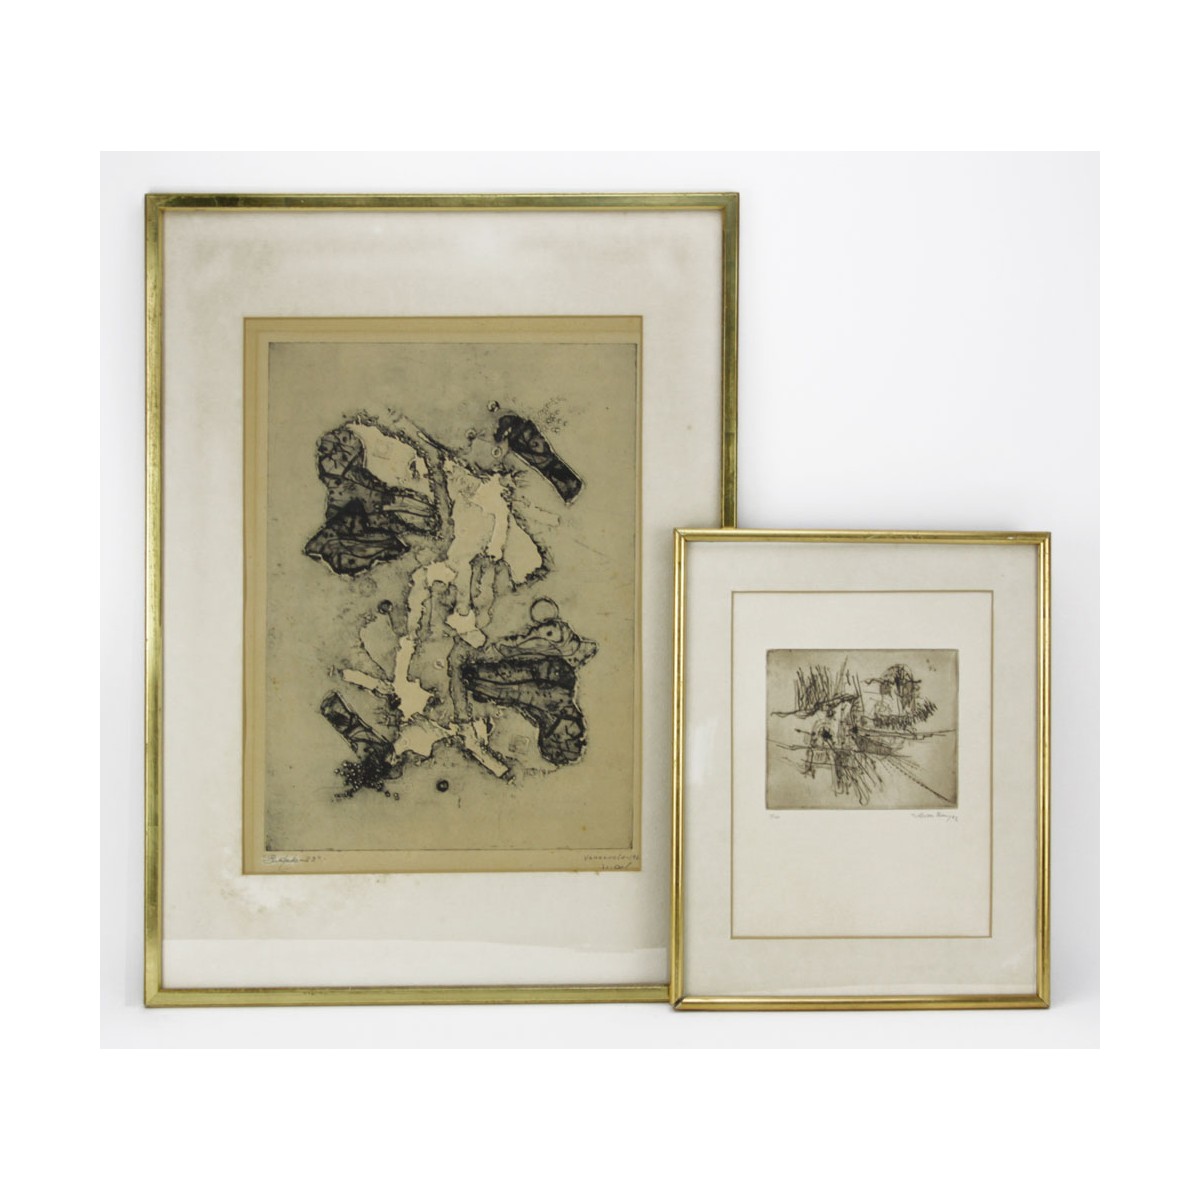 Two (2) Vintage Abstract Signed Etchings